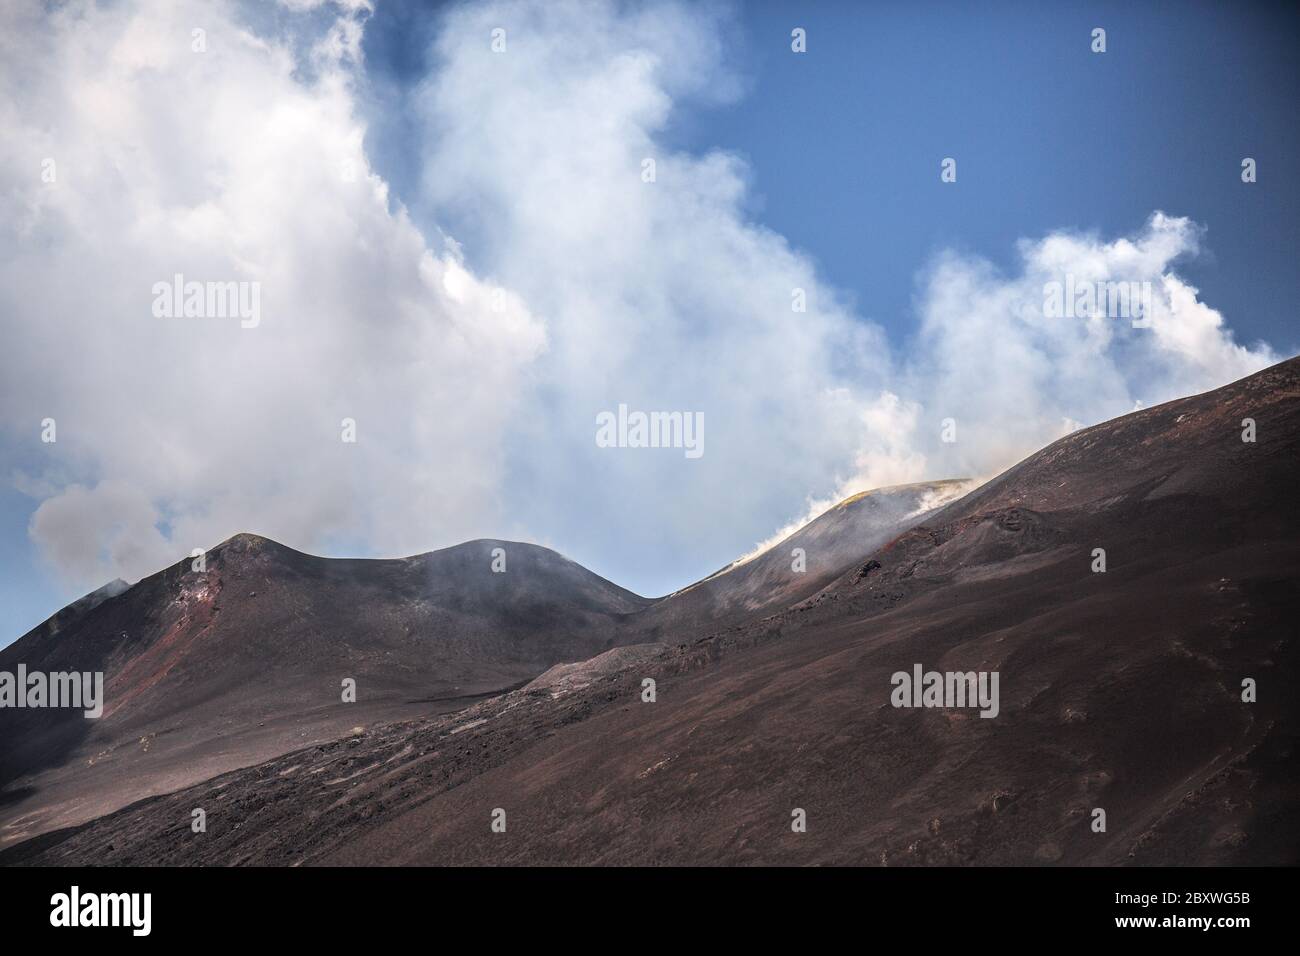 Etna Volcano with smoke and ash during eruption from top crater at sunset Stock Photo